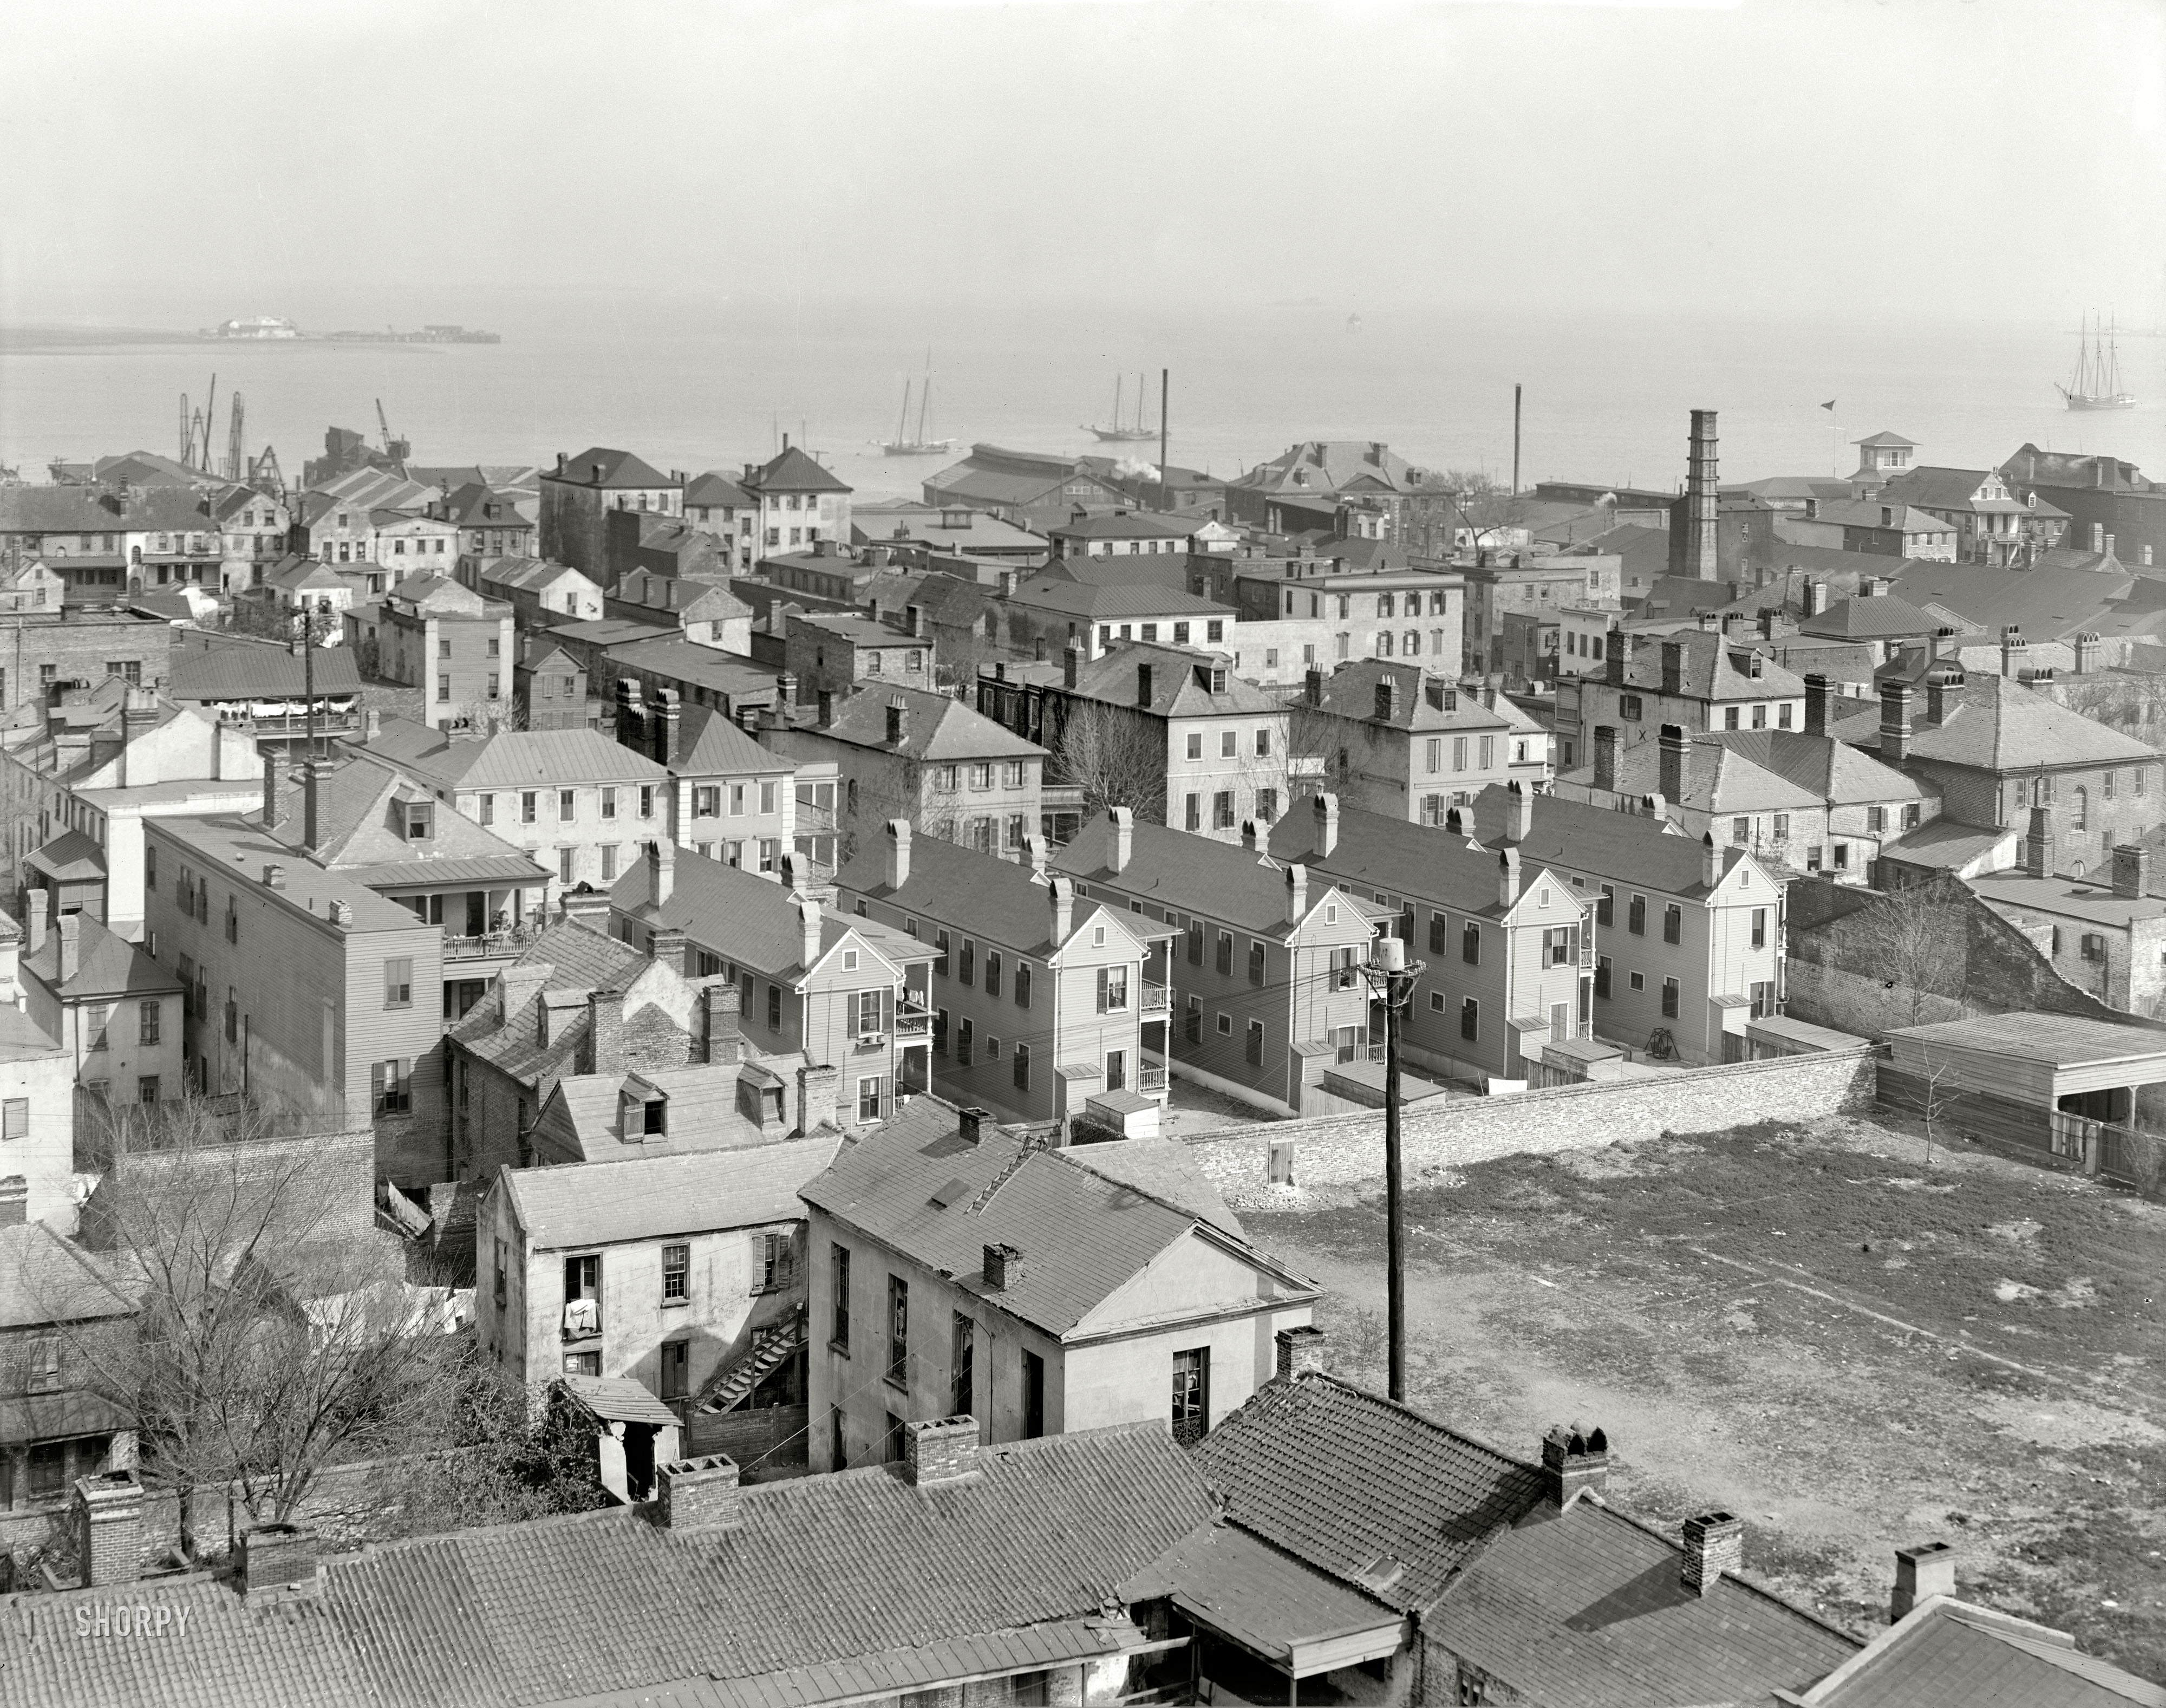 Circa 1910. "Charleston, South Carolina." A back-door view of the waterfront. 8x10 inch dry plate glass negative, Detroit Publishing Company. View full size.